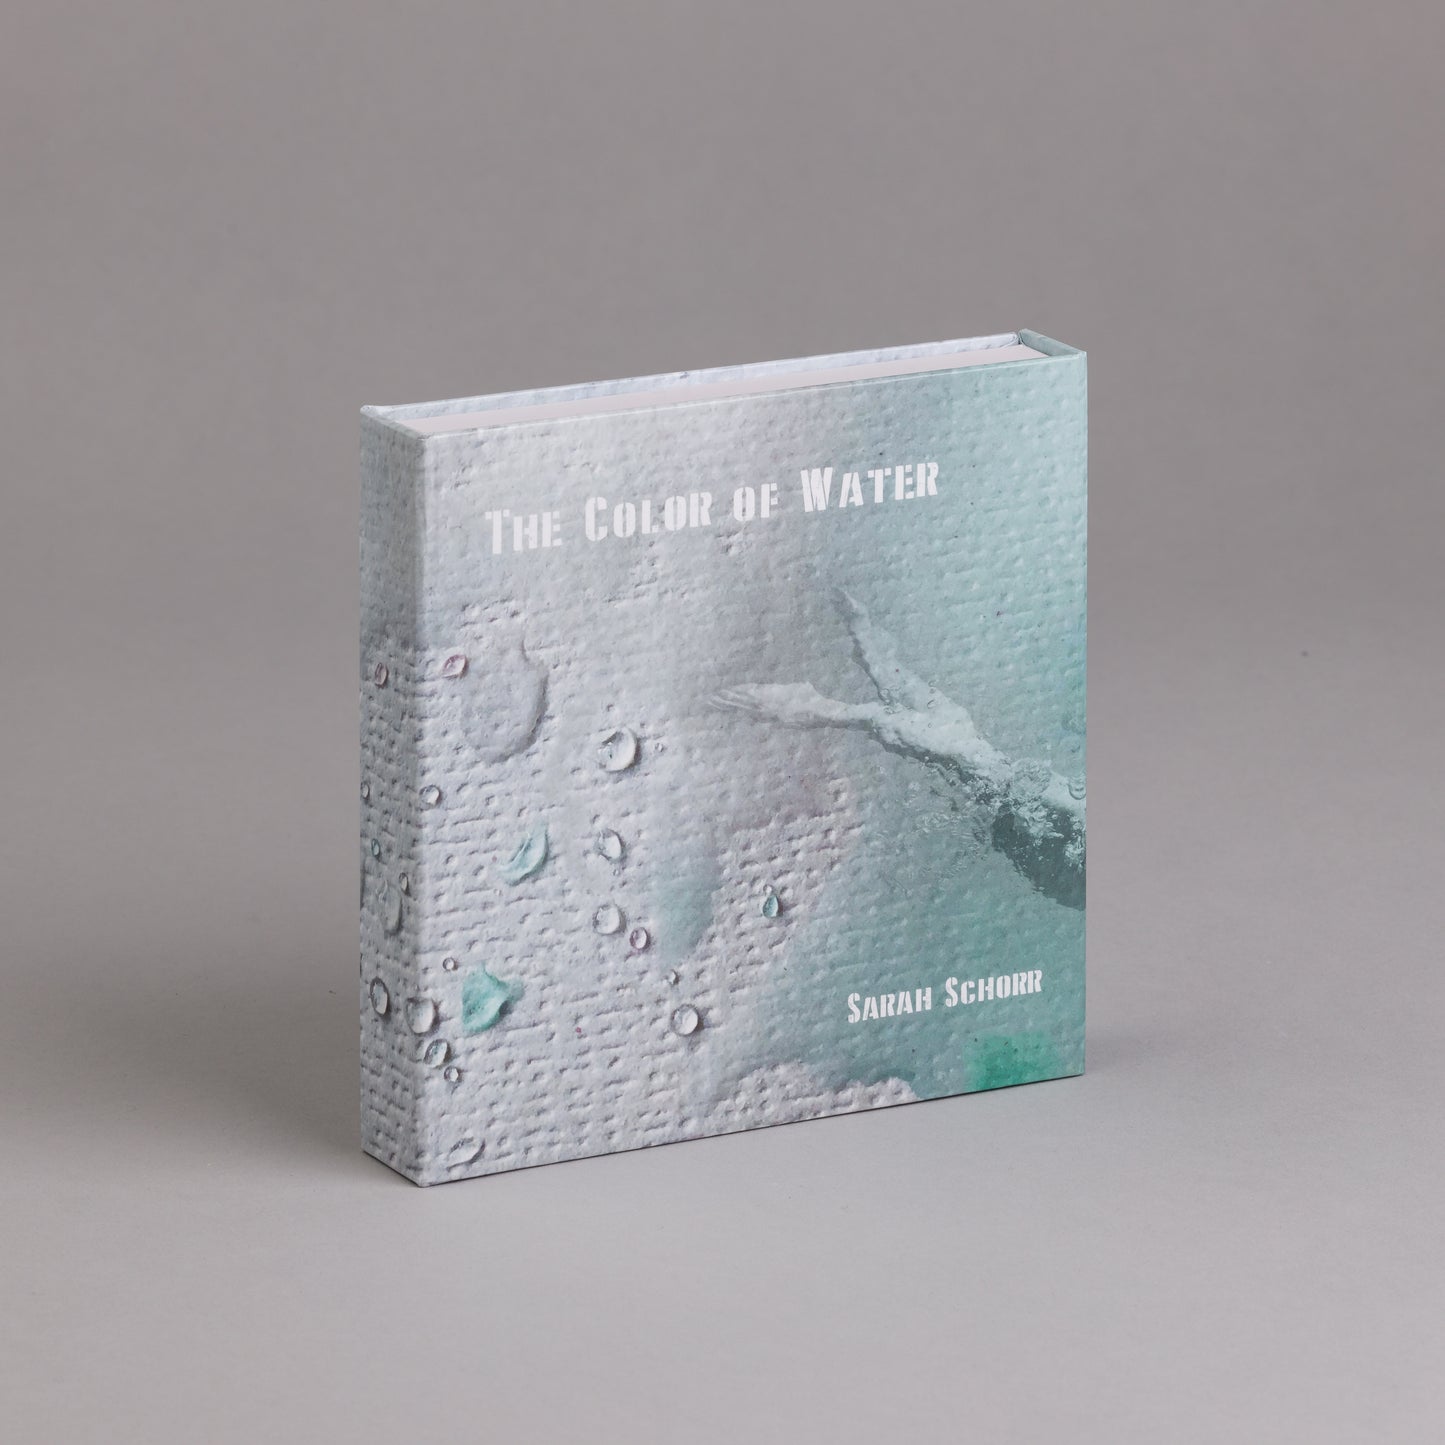 The Color of Water, Sarah Schorr (with box)